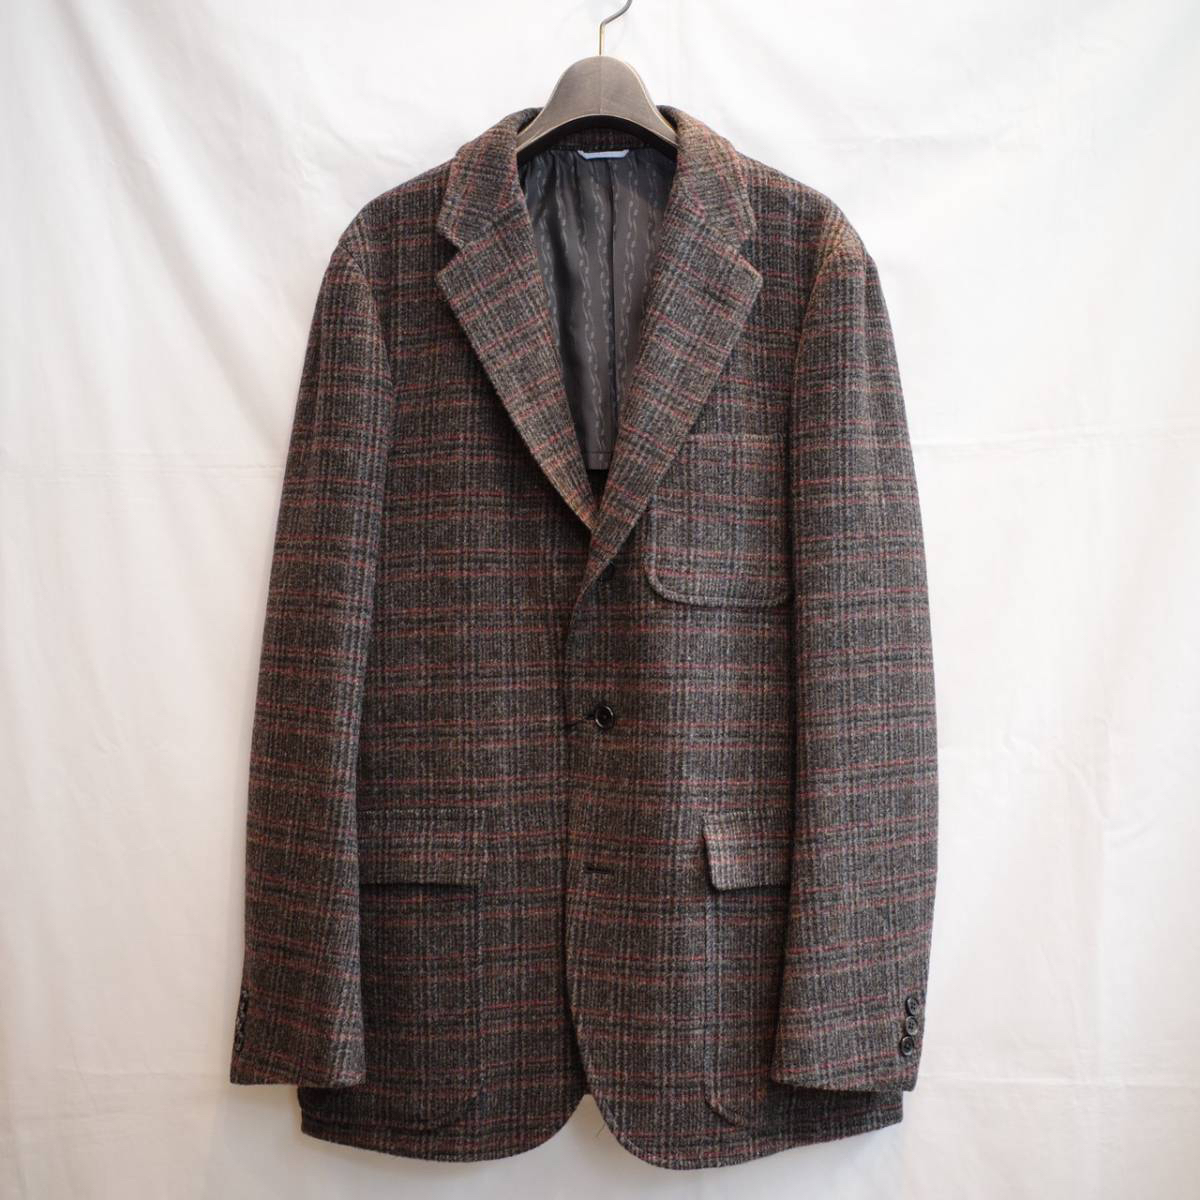 KENNETH FIELD / Jacket Collection